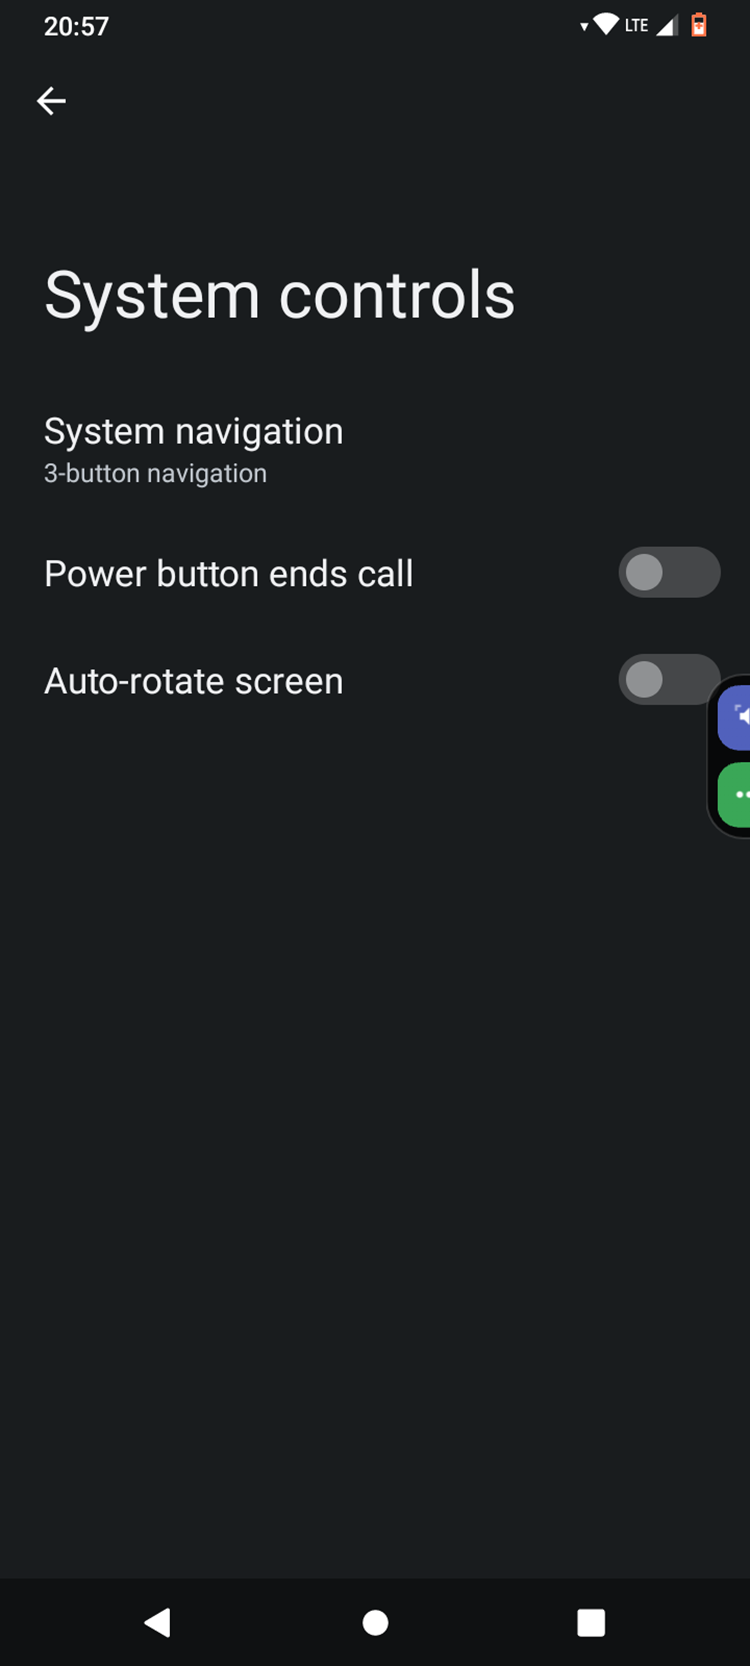 How to stop the power button from ending calls on iPhone